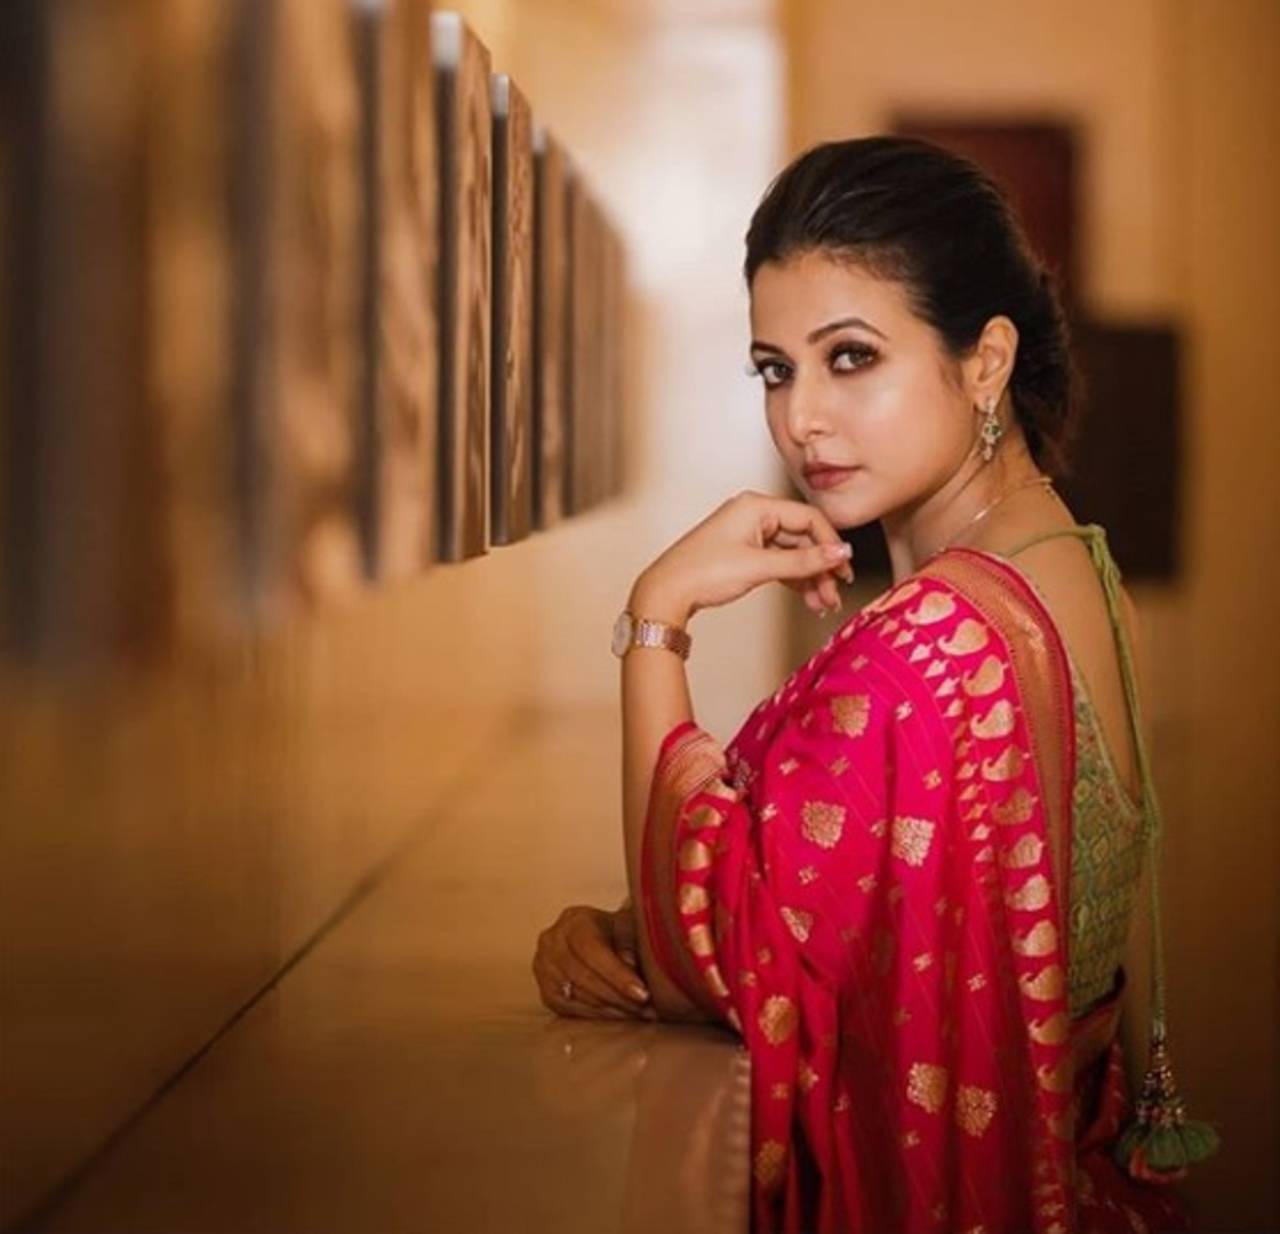 Koel Mallick Bf Sexy Video - Koel Mallick on playing a journalist in 'Flyover': My character is  determined, brave and headstrong | Bengali Movie News - Times of India